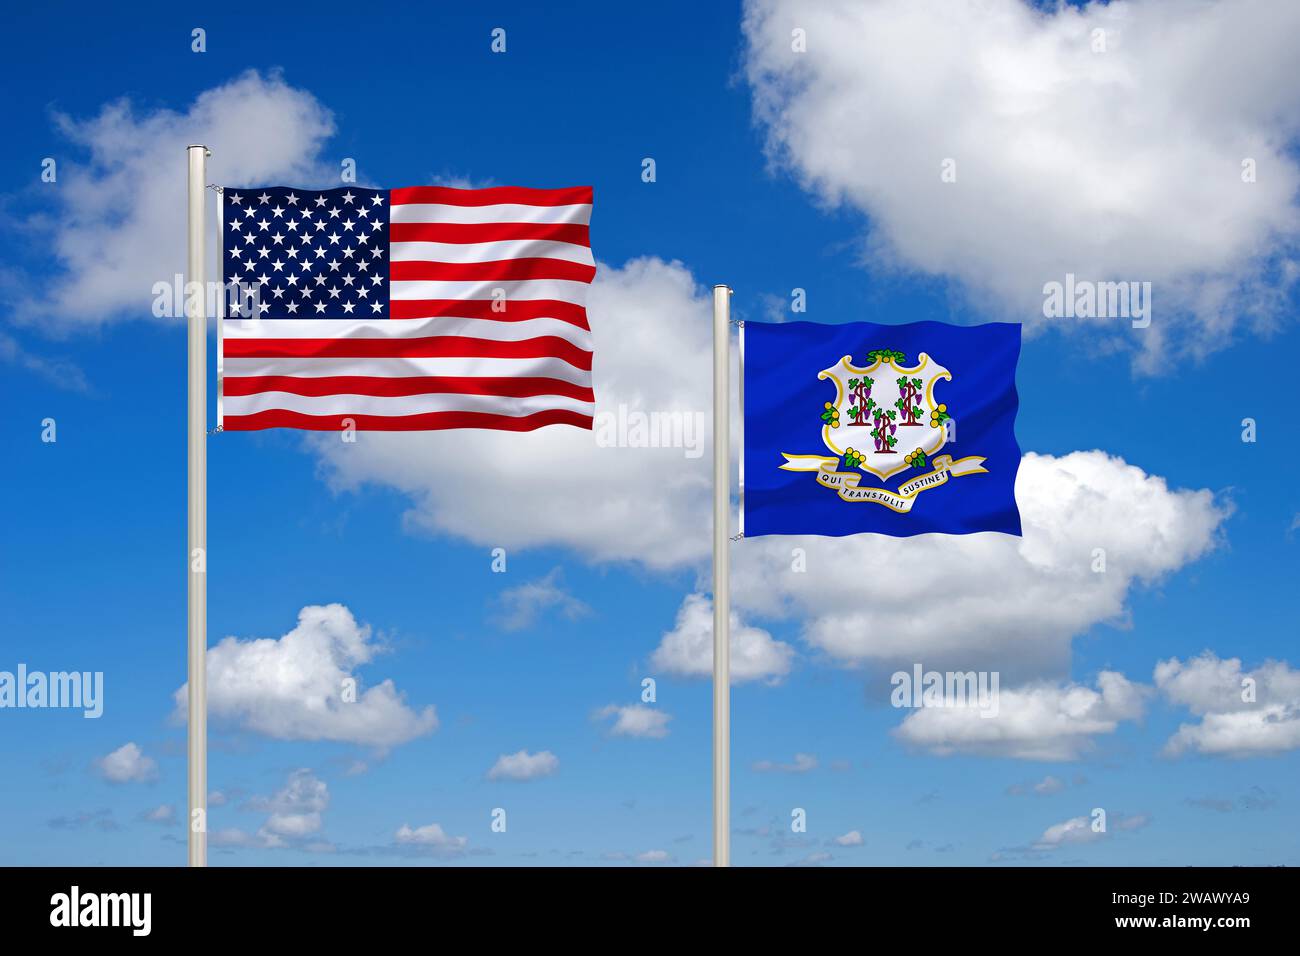 The flag of the USa and Connecticut, Studio Stock Photo